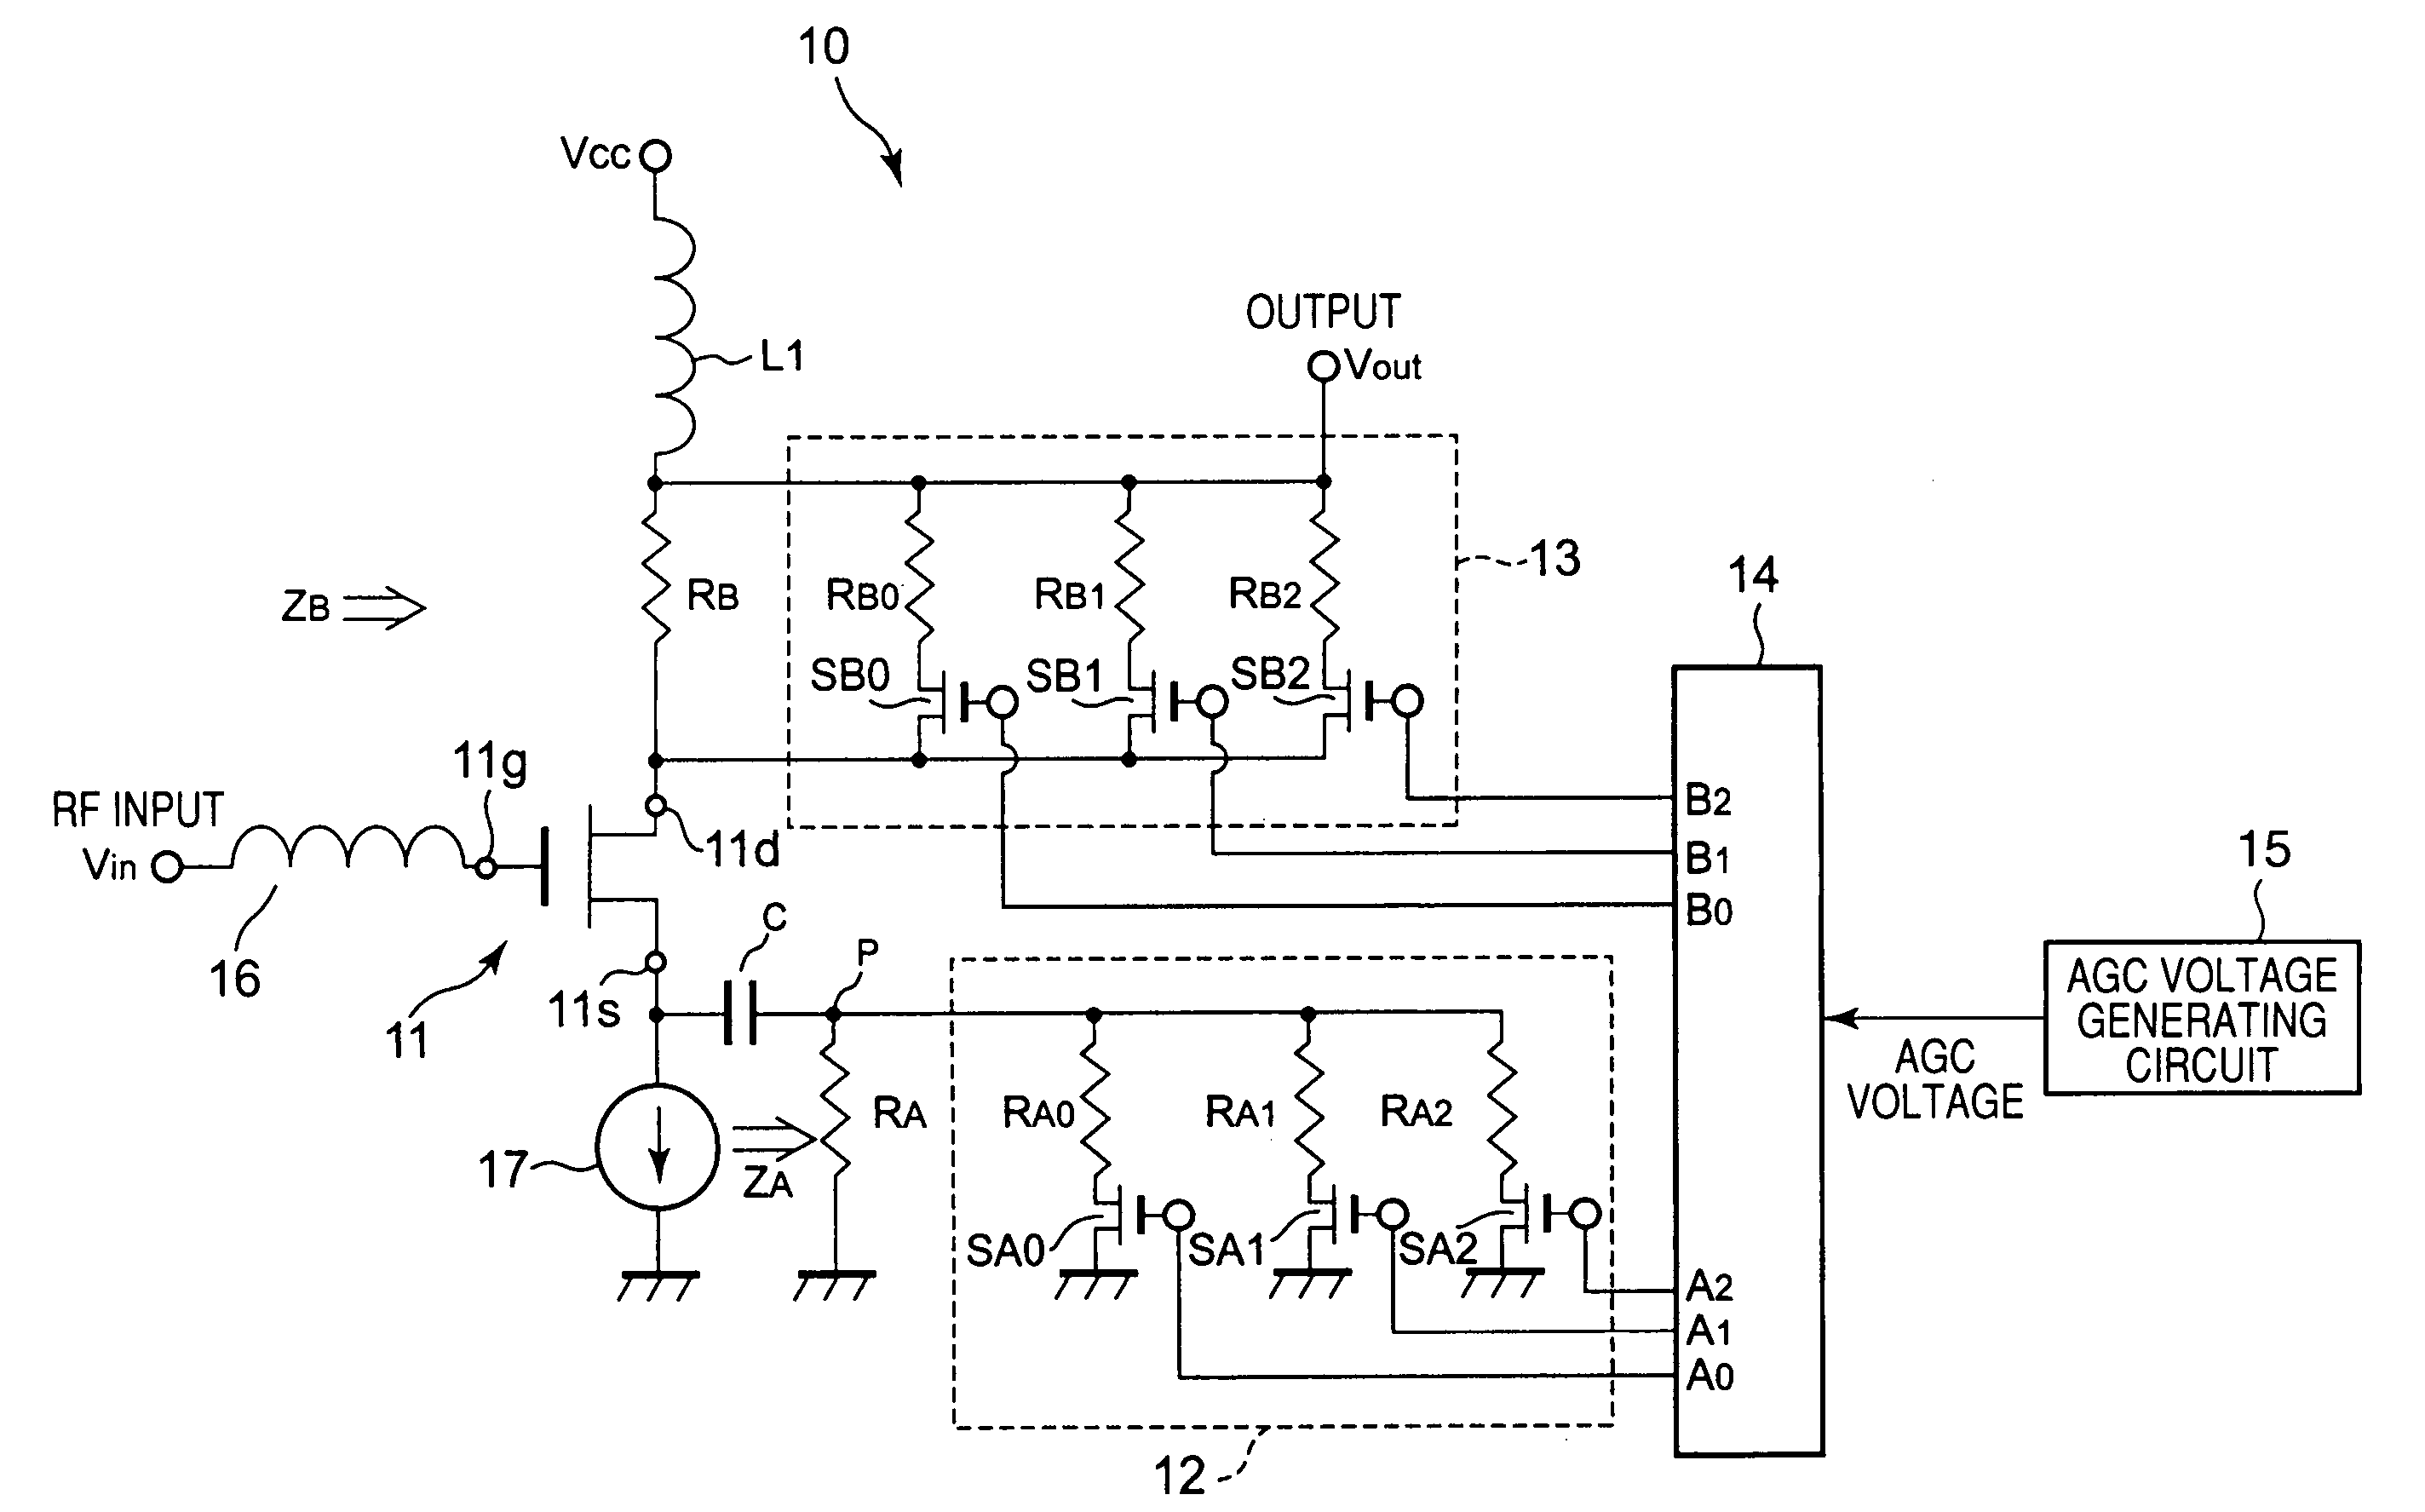 AGC circuit which is hard to be influenced by level of input signal